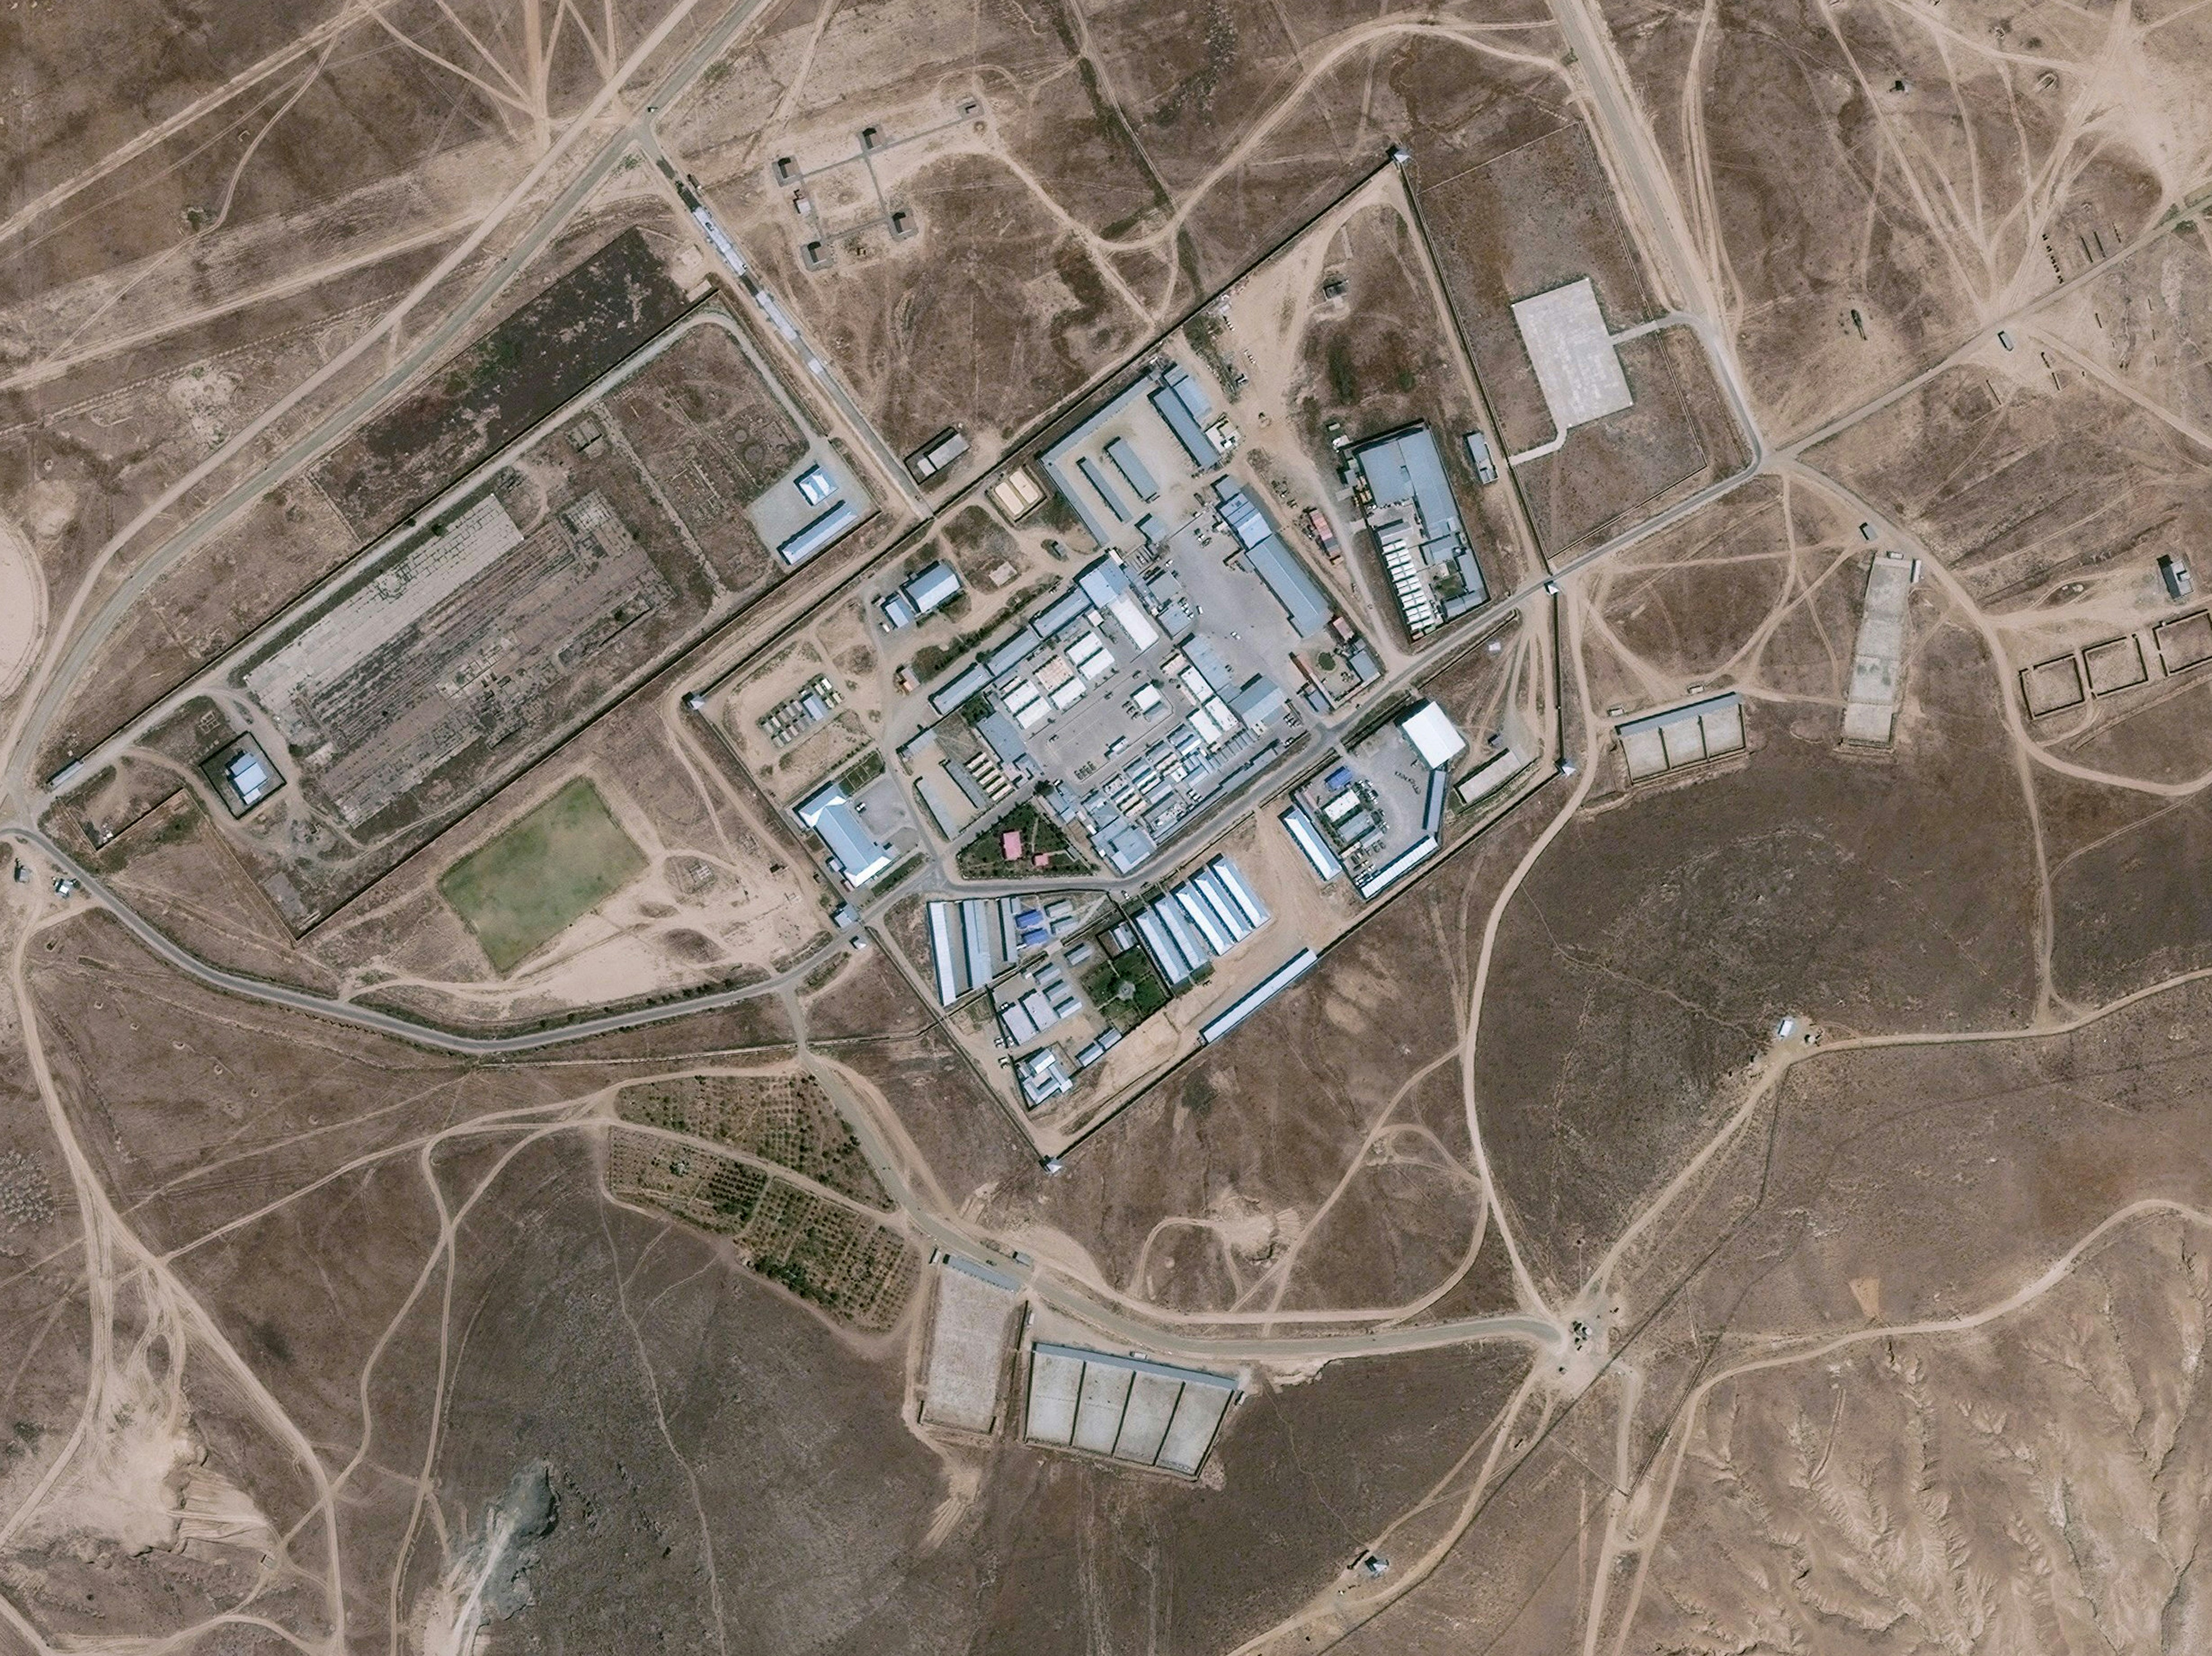 DigitalGlobe satellite imagery of a the Salt Pit outside of Kabul, Afghanistan.  The Salt Pit was the codename of an isolated clandestine CIA black site prison and interrogation center in Afghanistan.